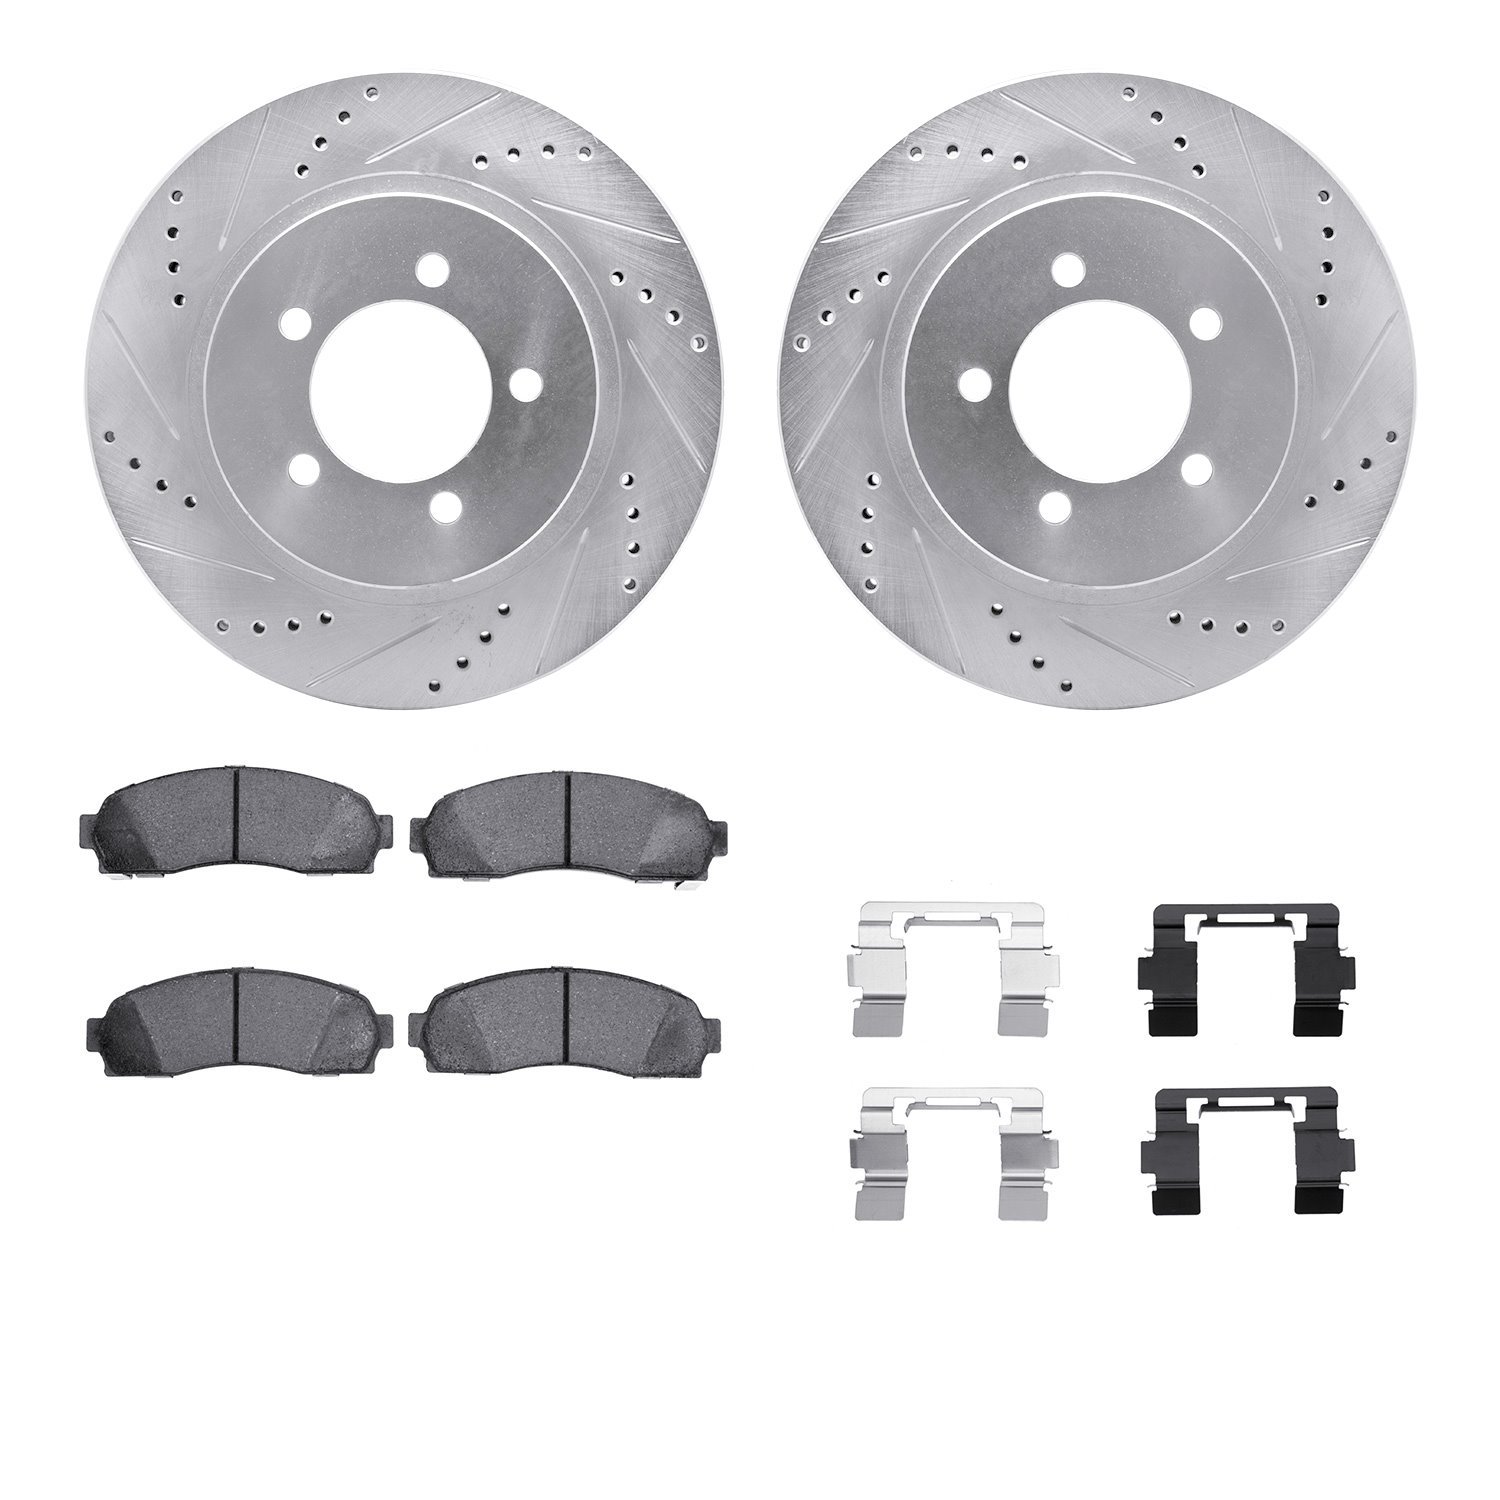 7412-54067 Drilled/Slotted Brake Rotors with Ultimate-Duty Brake Pads Kit & Hardware [Silver], 2002-2005 Ford/Lincoln/Mercury/Ma